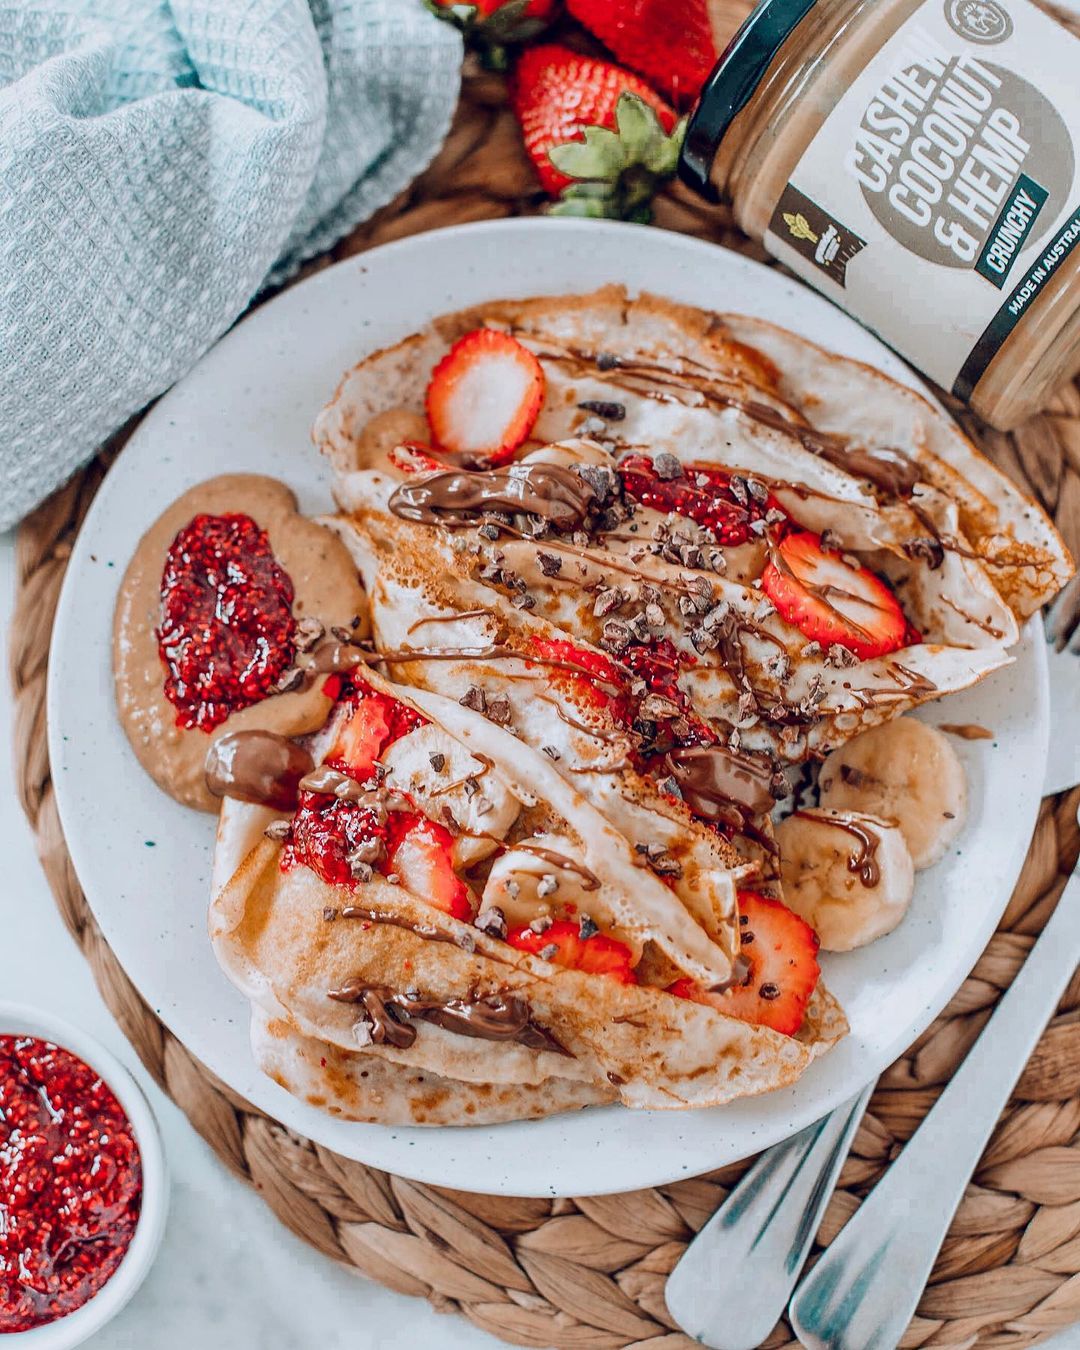 Sweet crepes filled with nut butter